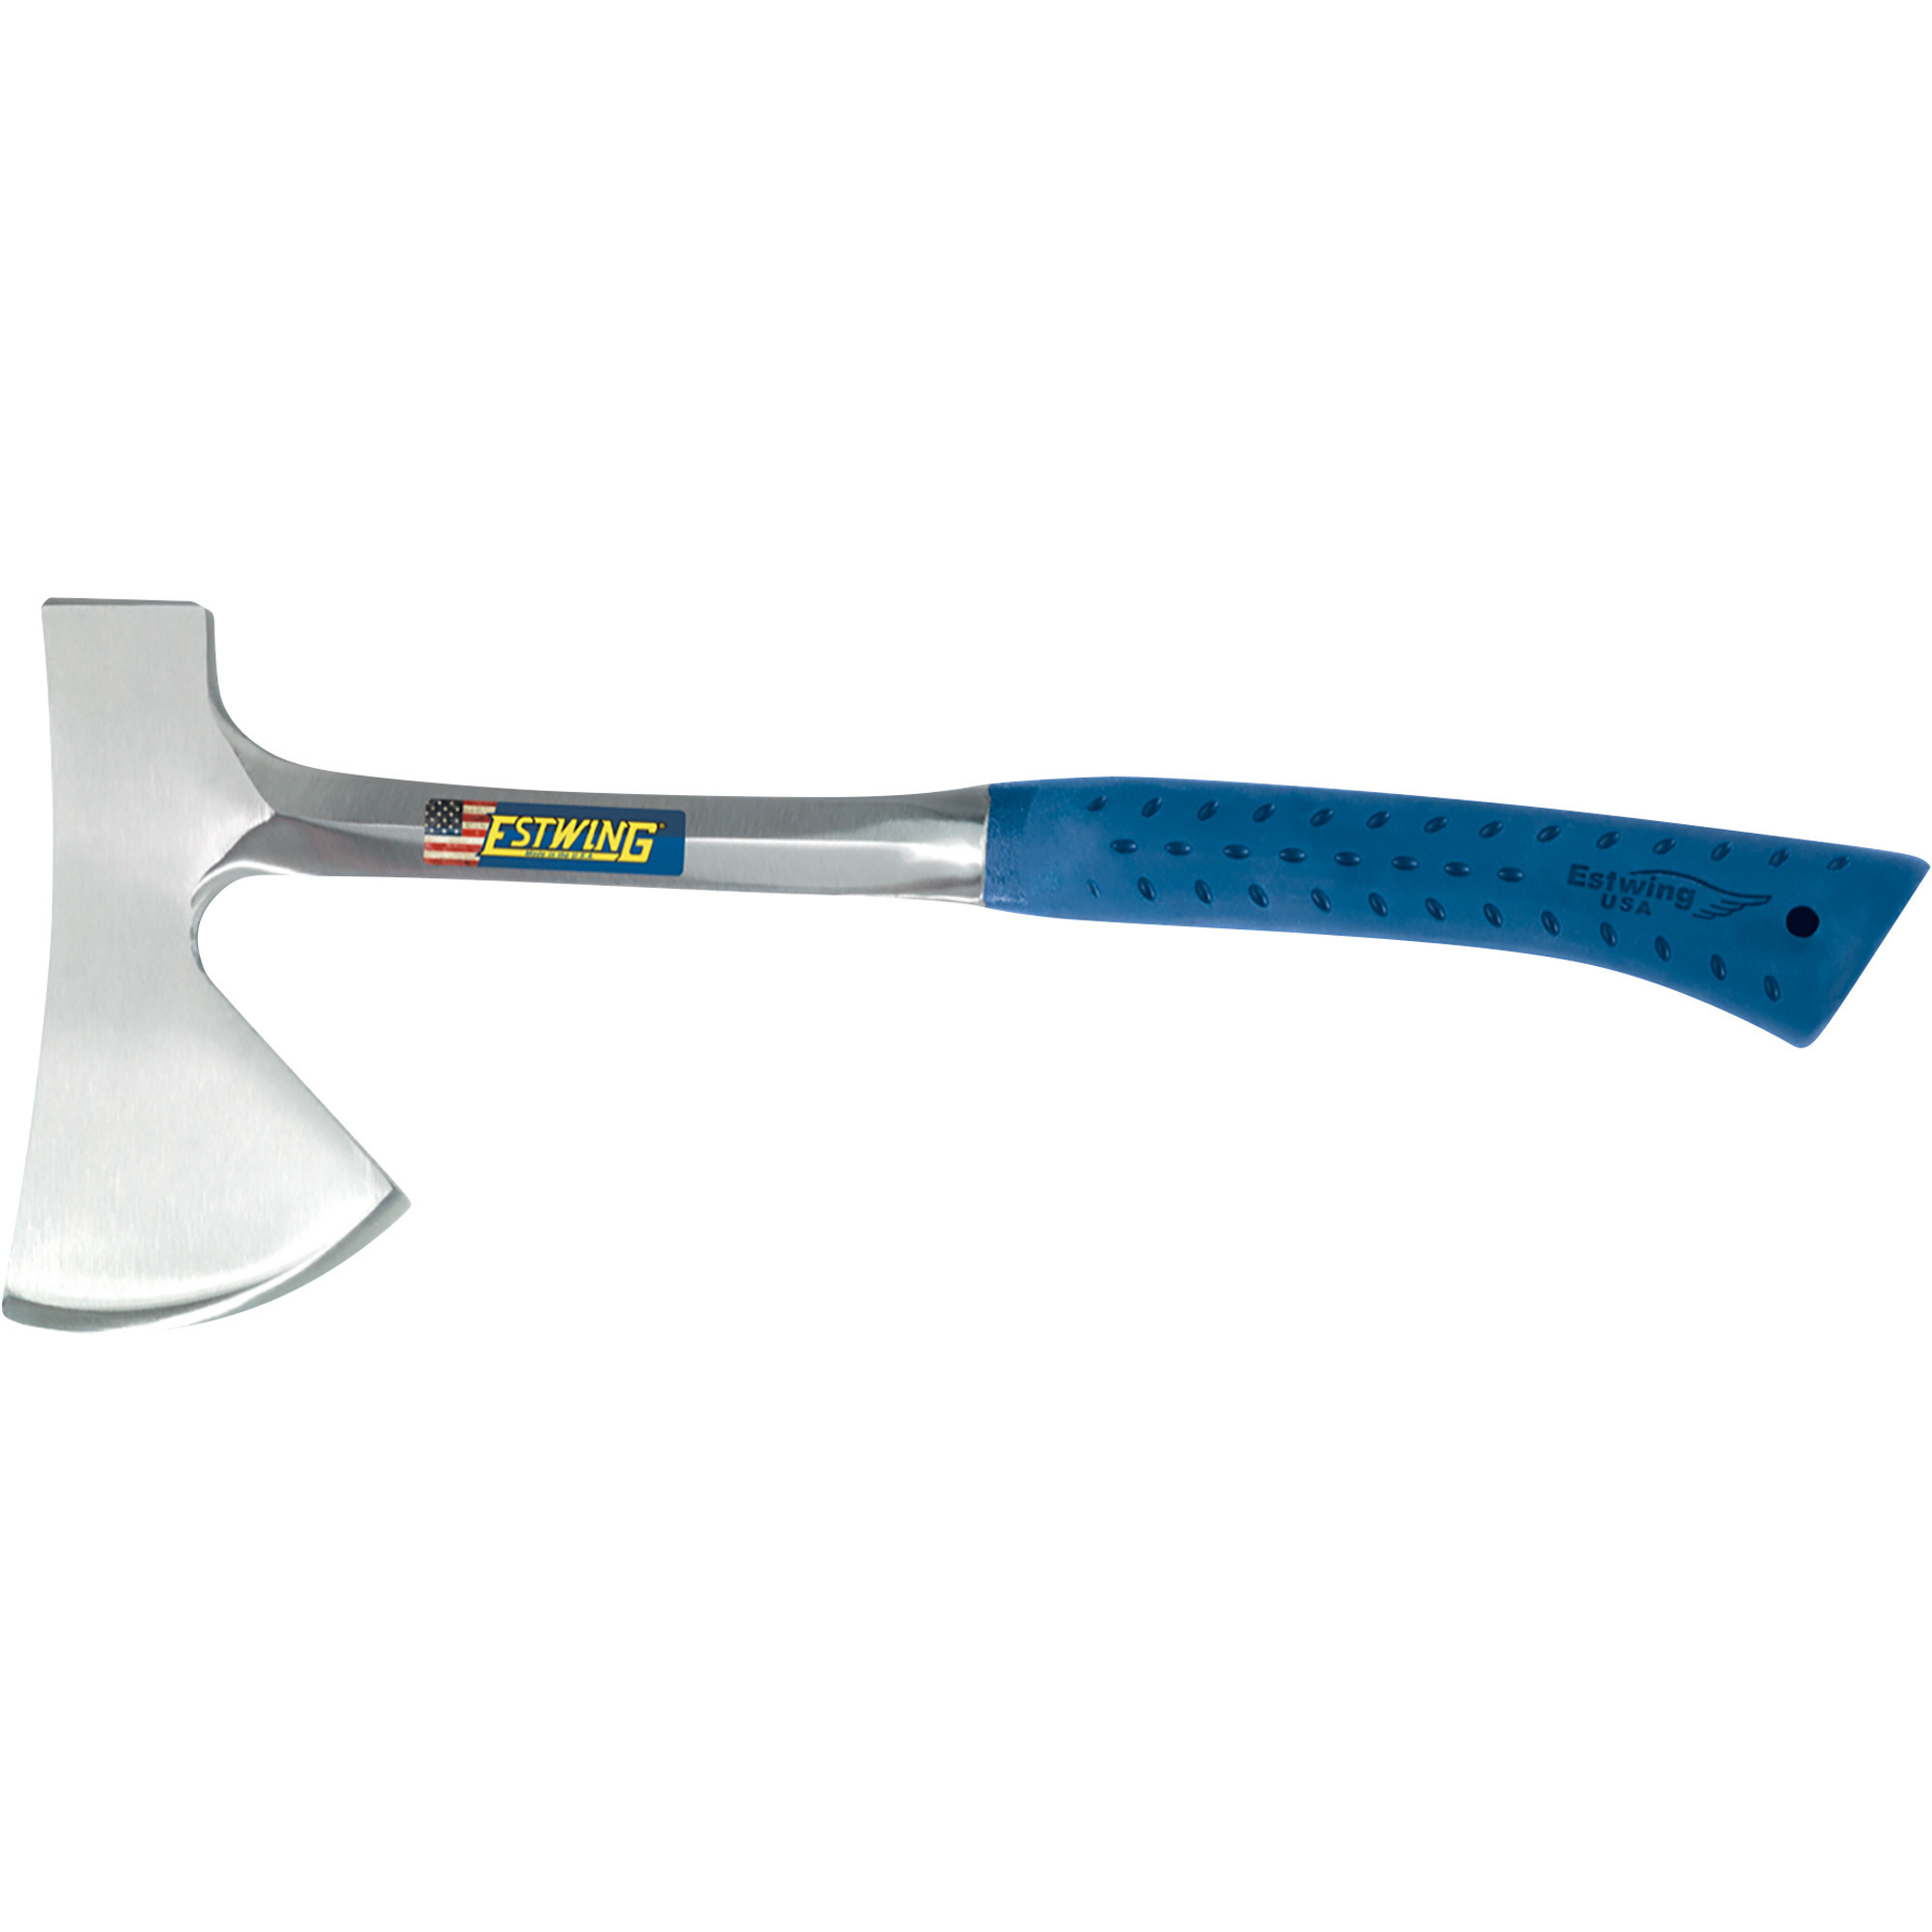 Estwing 16Inch Camper's Axe â Vinyl Grip, Model E44A